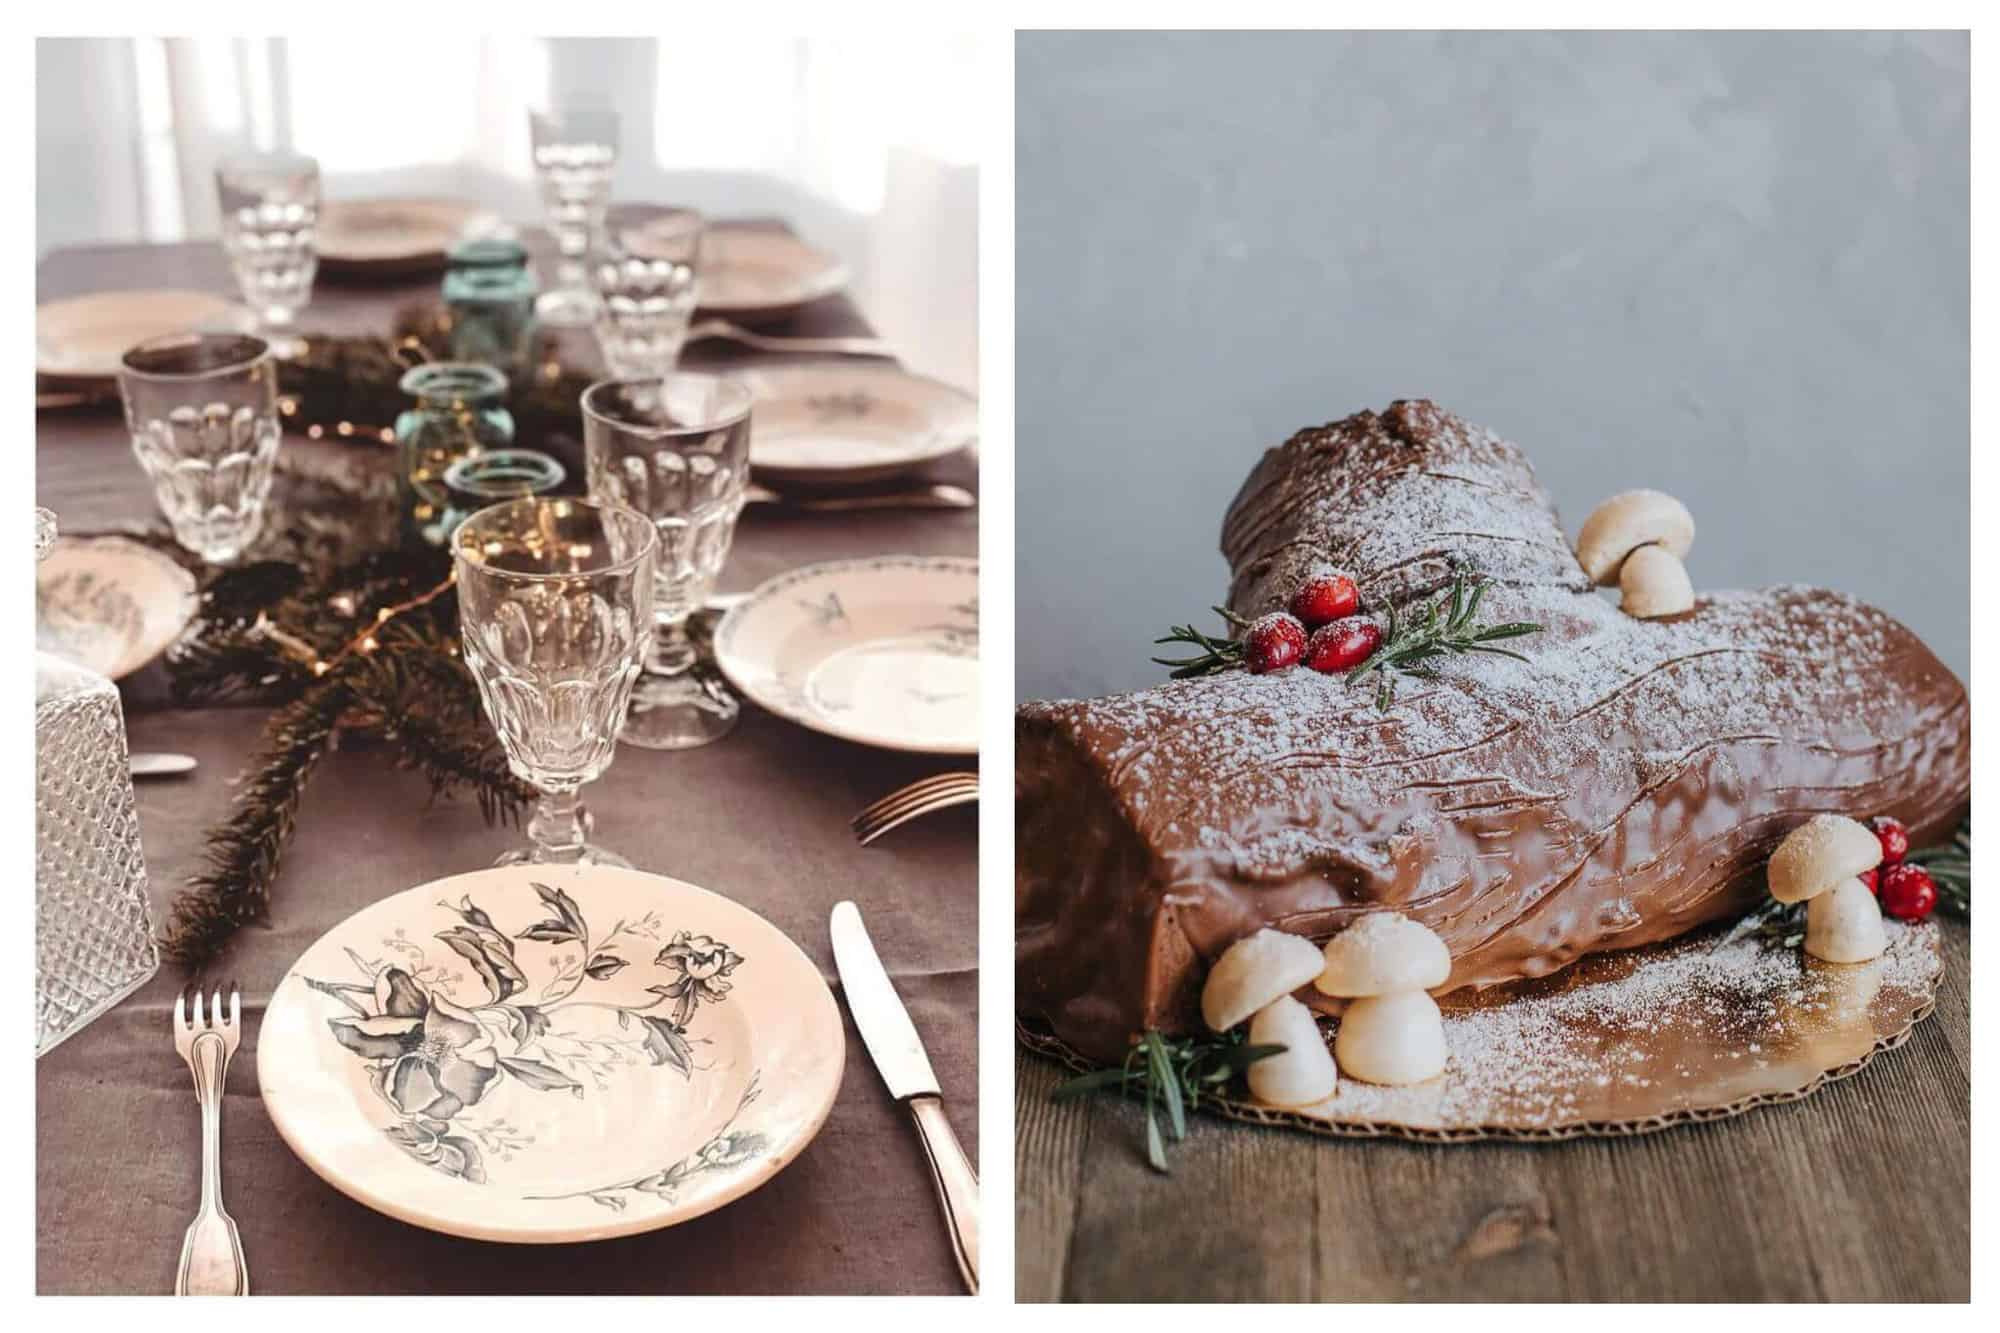 Left: a table set for a holiday meal taken from the head of the table. There are 7 plates that are white with a dark blue flower detail painted on them. There are glasses at each place setting and there is a center piece made from blue glass candle holders, fairy lights, and pine branches. Right: a buche de Noel dessert. It is chocolate and covered in powdered sugar and there are mushrooms made from sugar at the base. A few cranberries and sprigs of pine decorate the cake.